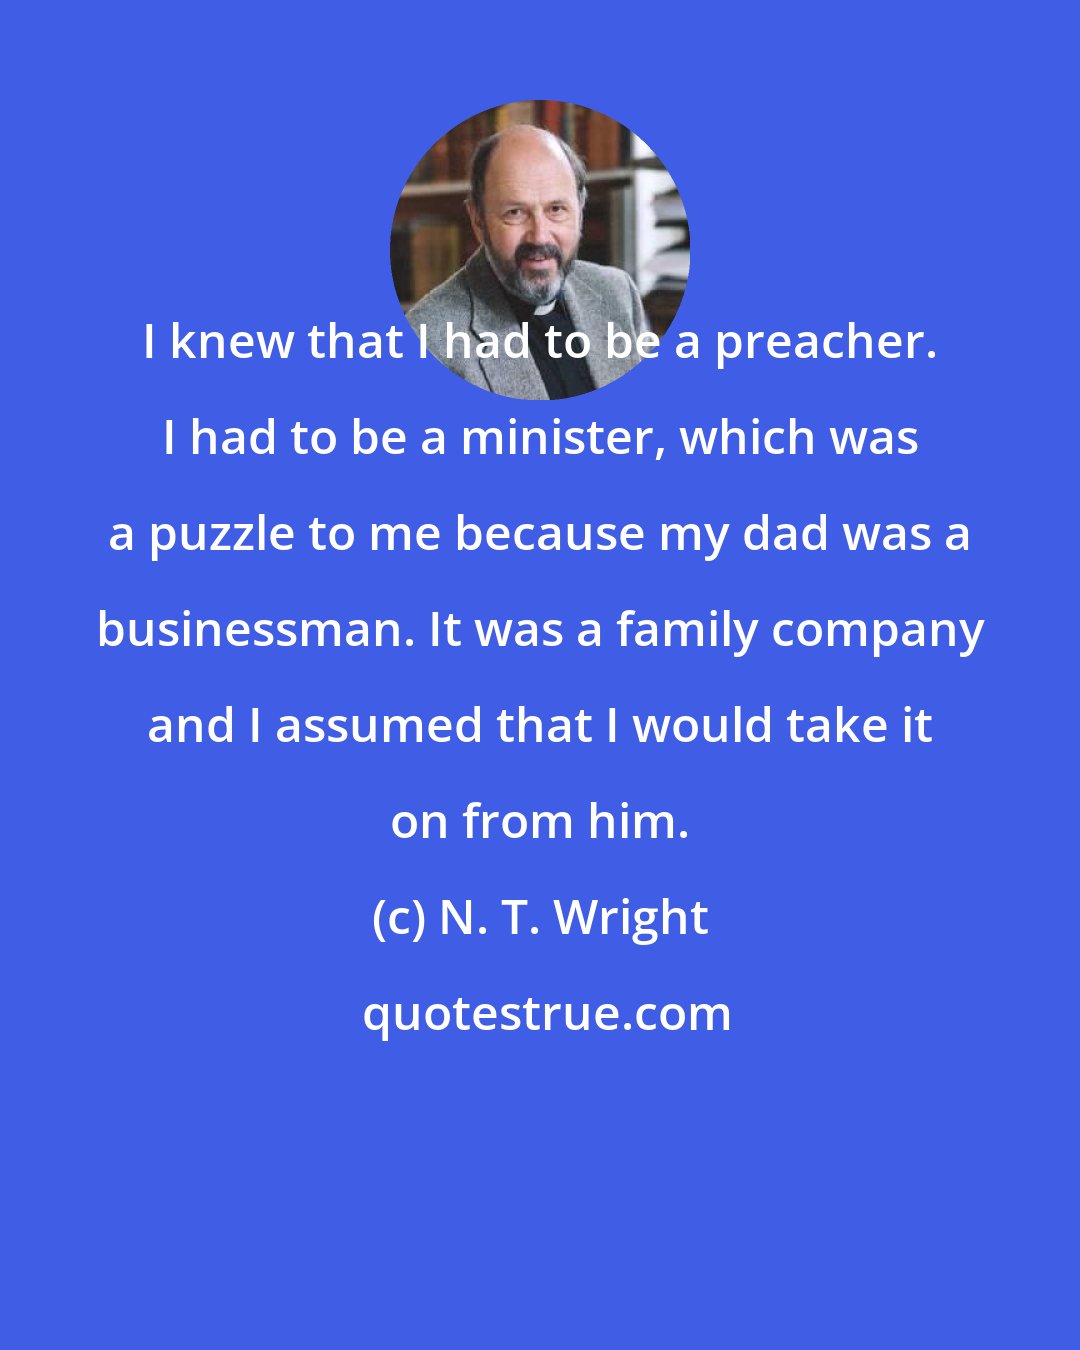 N. T. Wright: I knew that I had to be a preacher. I had to be a minister, which was a puzzle to me because my dad was a businessman. It was a family company and I assumed that I would take it on from him.